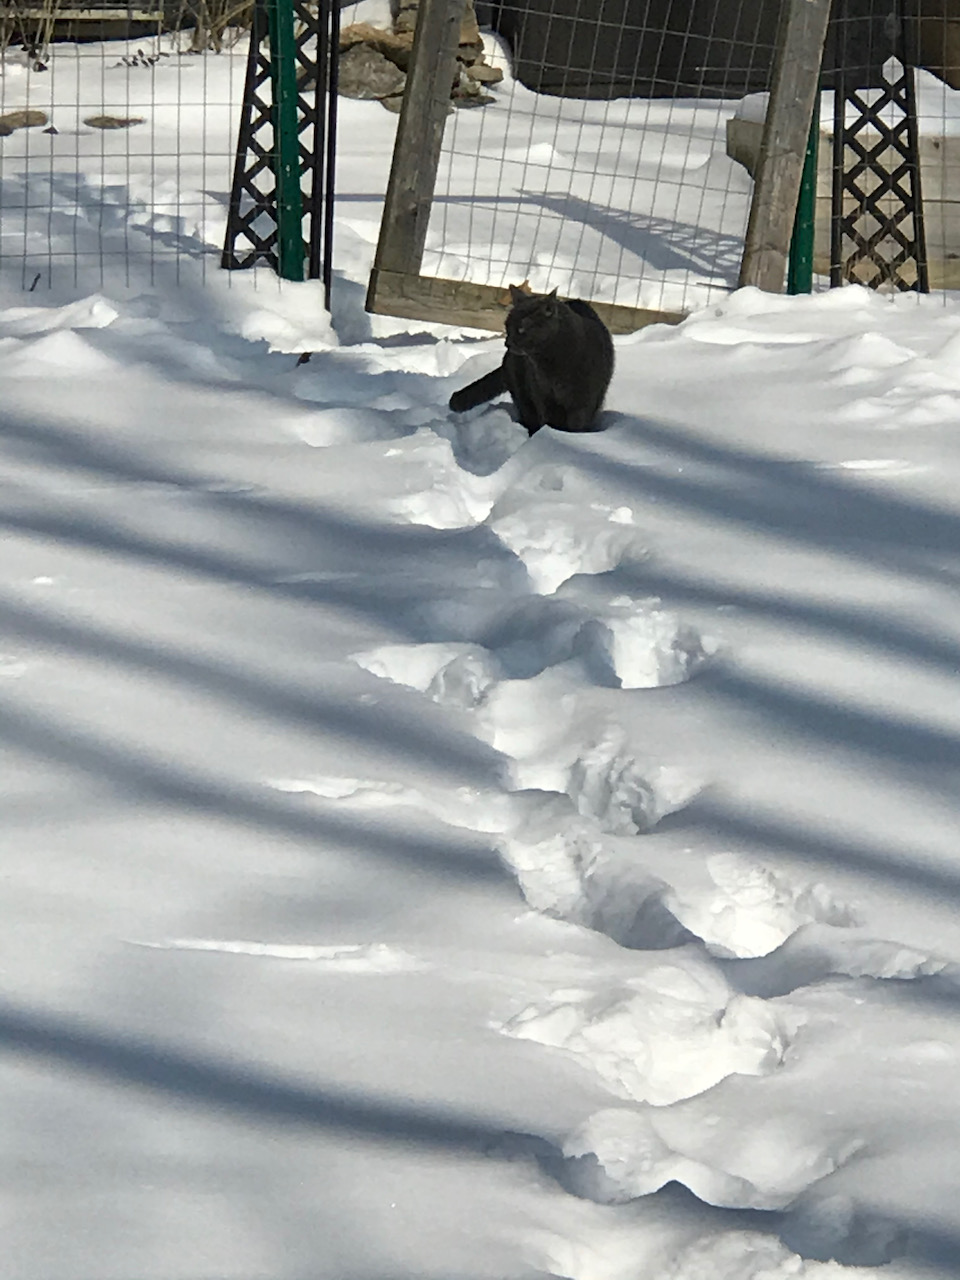 Caturday Snow Adventure with Shady Cat